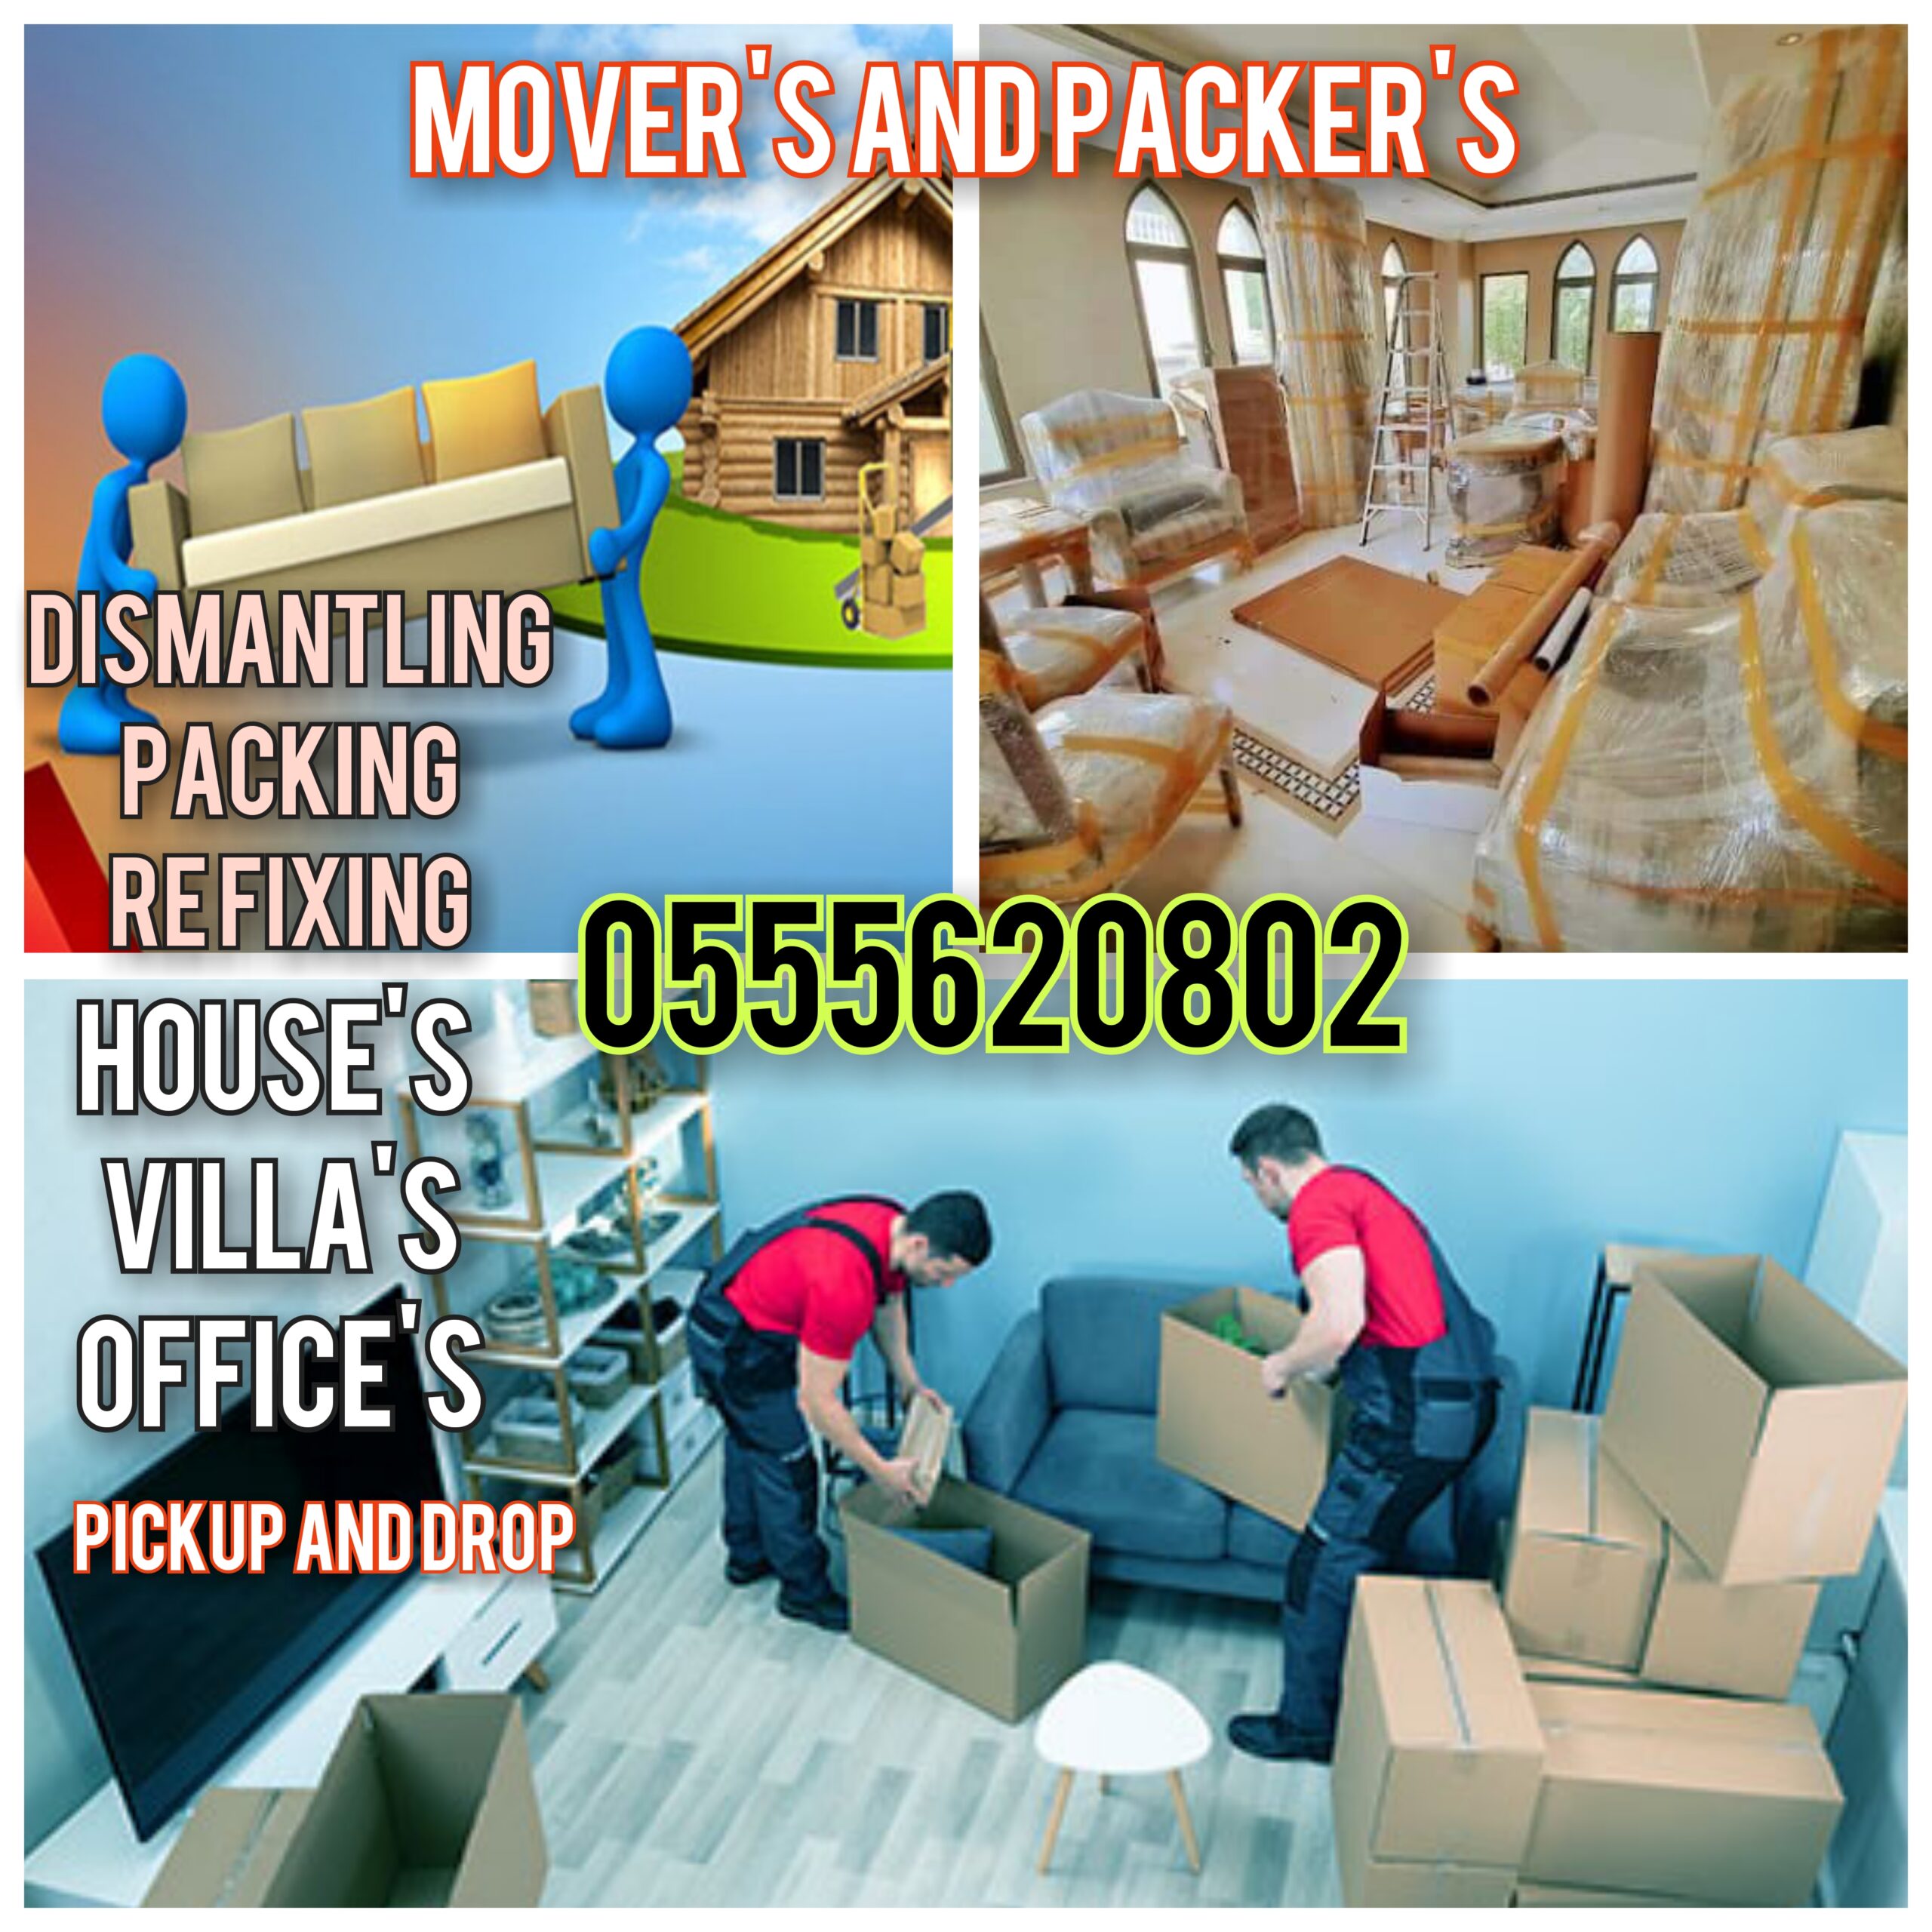 Mover’s and packer’s